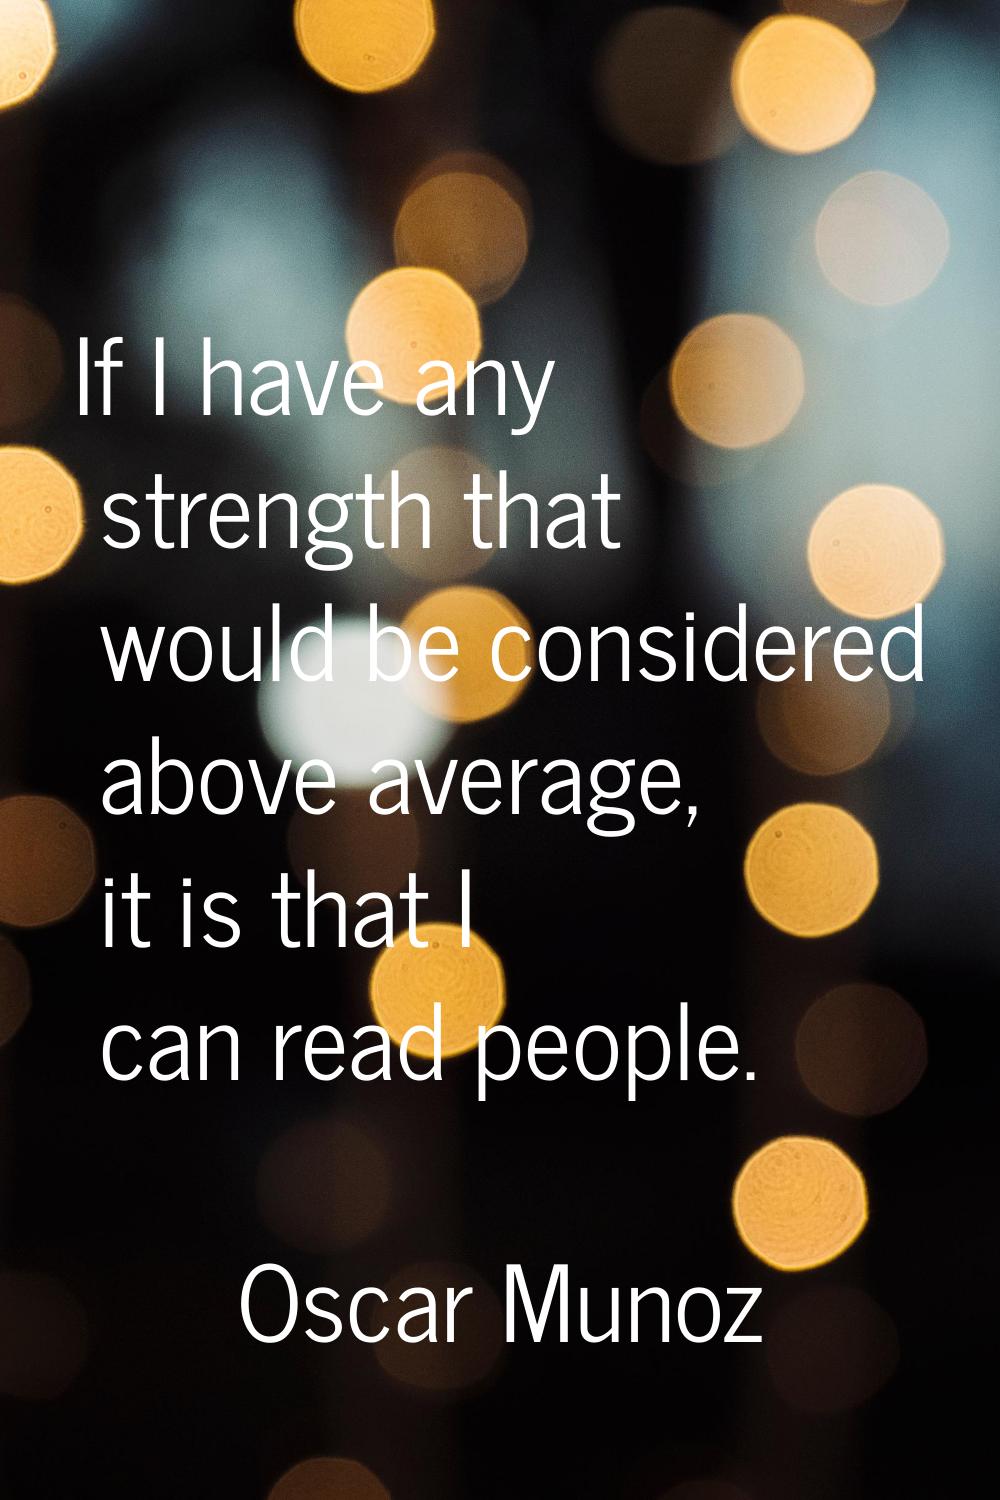 If I have any strength that would be considered above average, it is that I can read people.